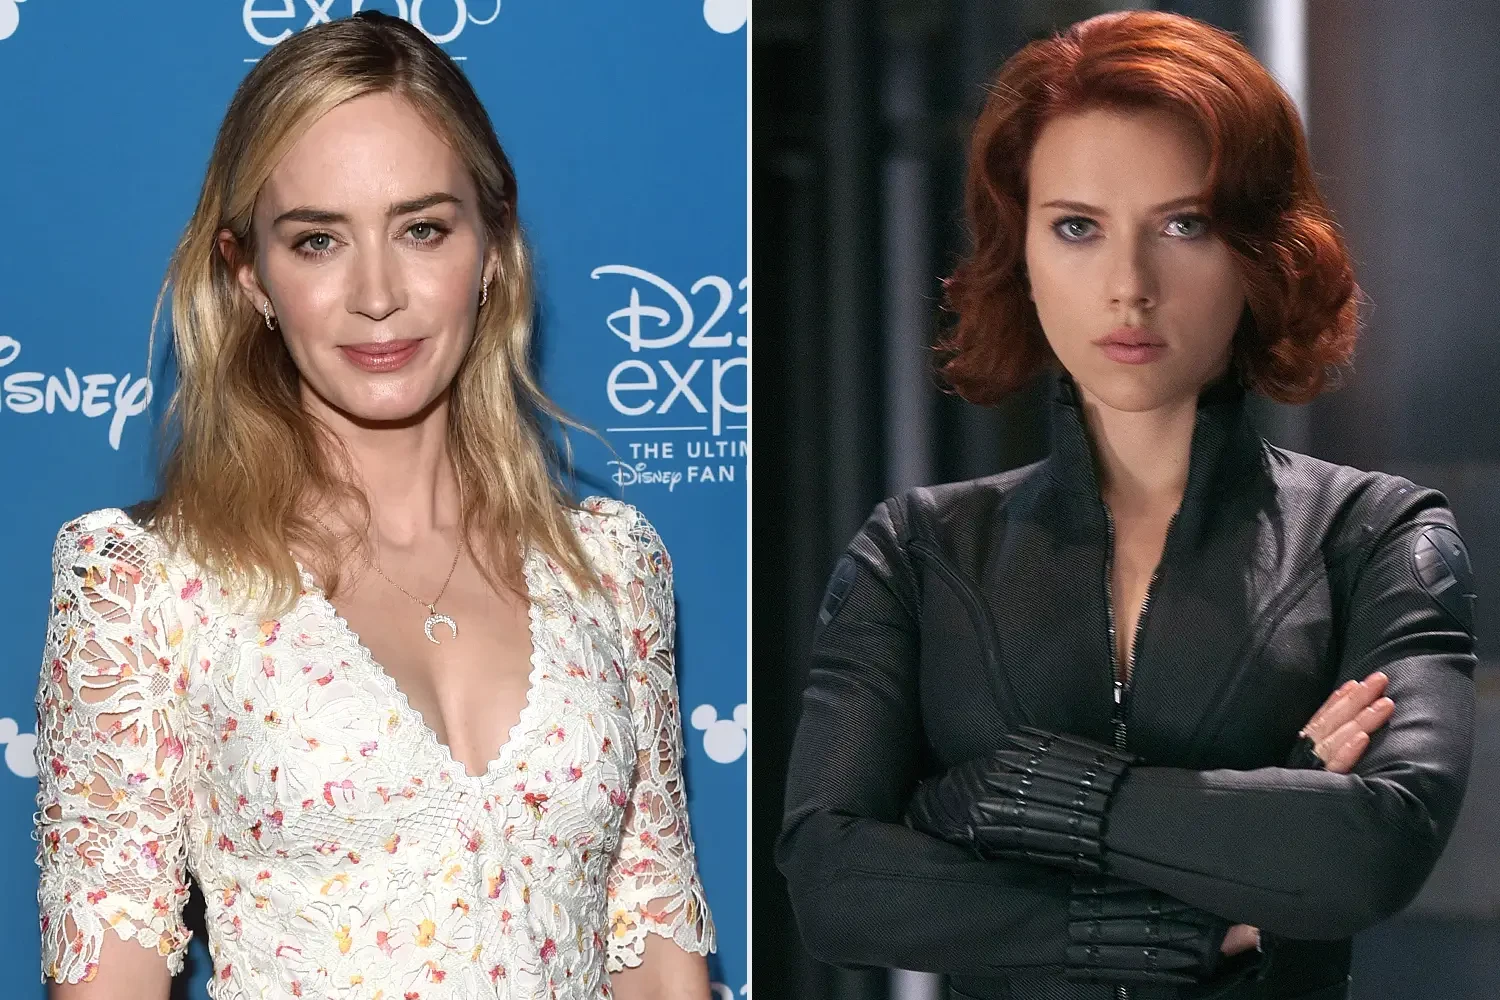 Blunt was the first choice to play Scarlett Johansson's Black Widow